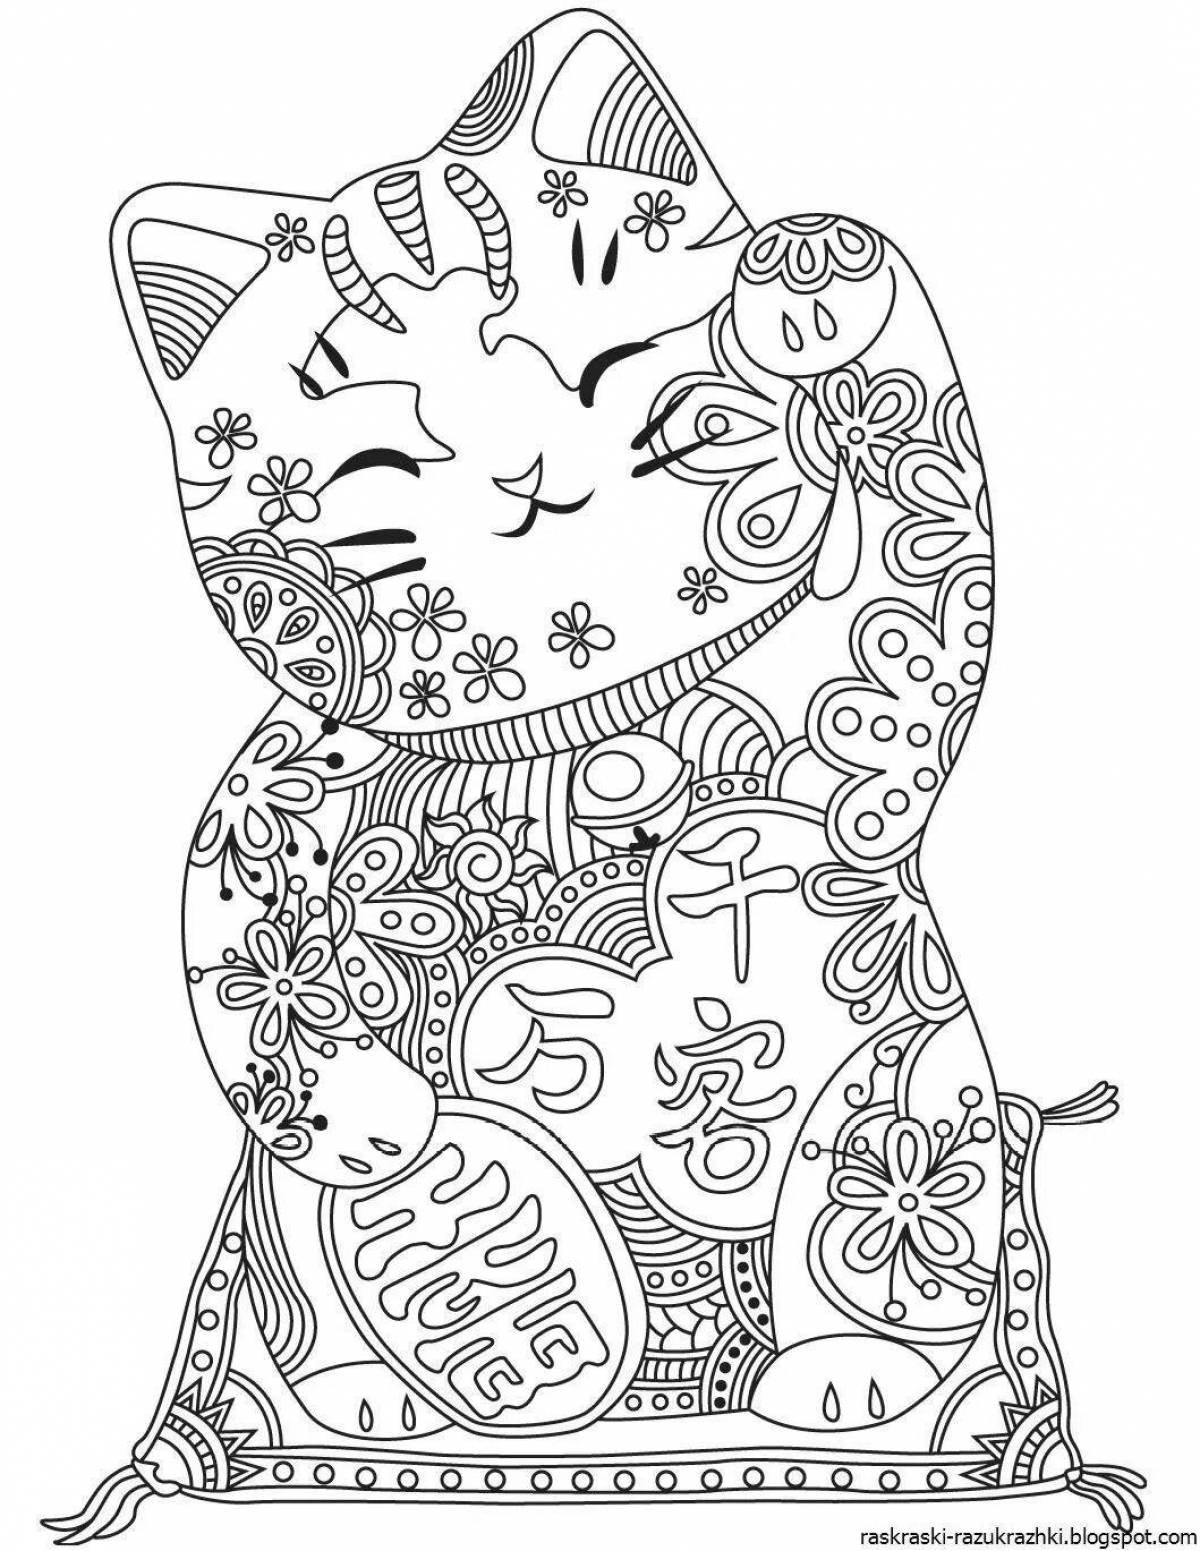 Fun coloring for girls 12 years old - cats